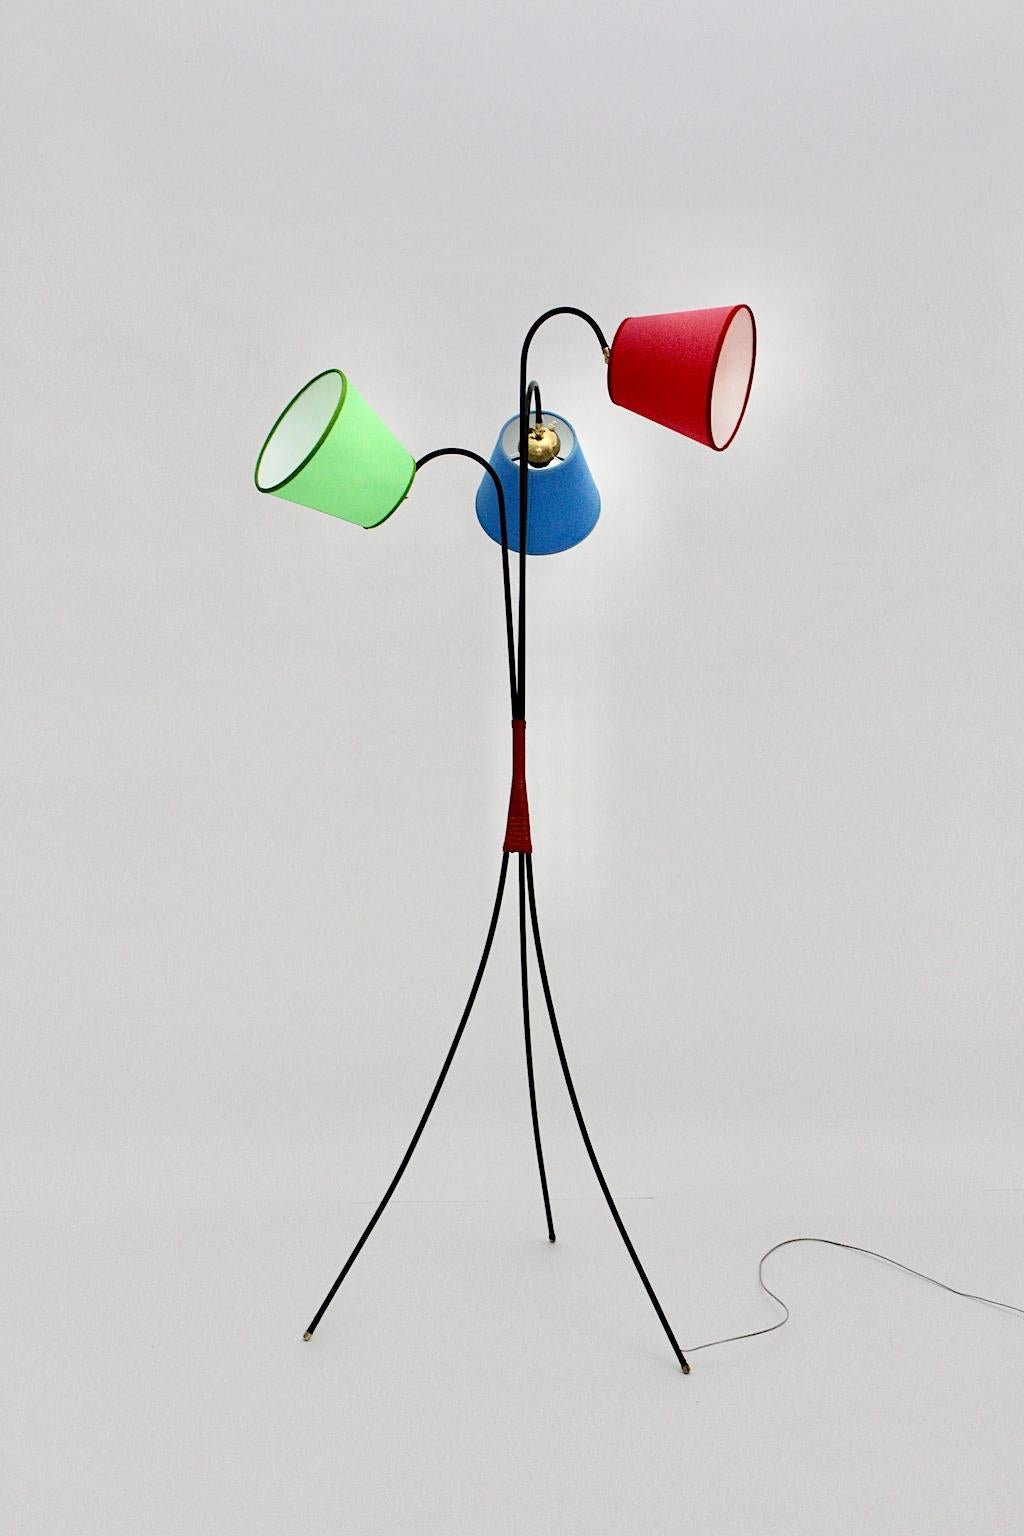 Mid-Century Modern vintage black metal trilegged floor lamp 1950s Vienna was made of black coated metal wire with red plastic strings, which waist and connect the black metal feet. Furthermore the renewed lampshades, which are recreated like the